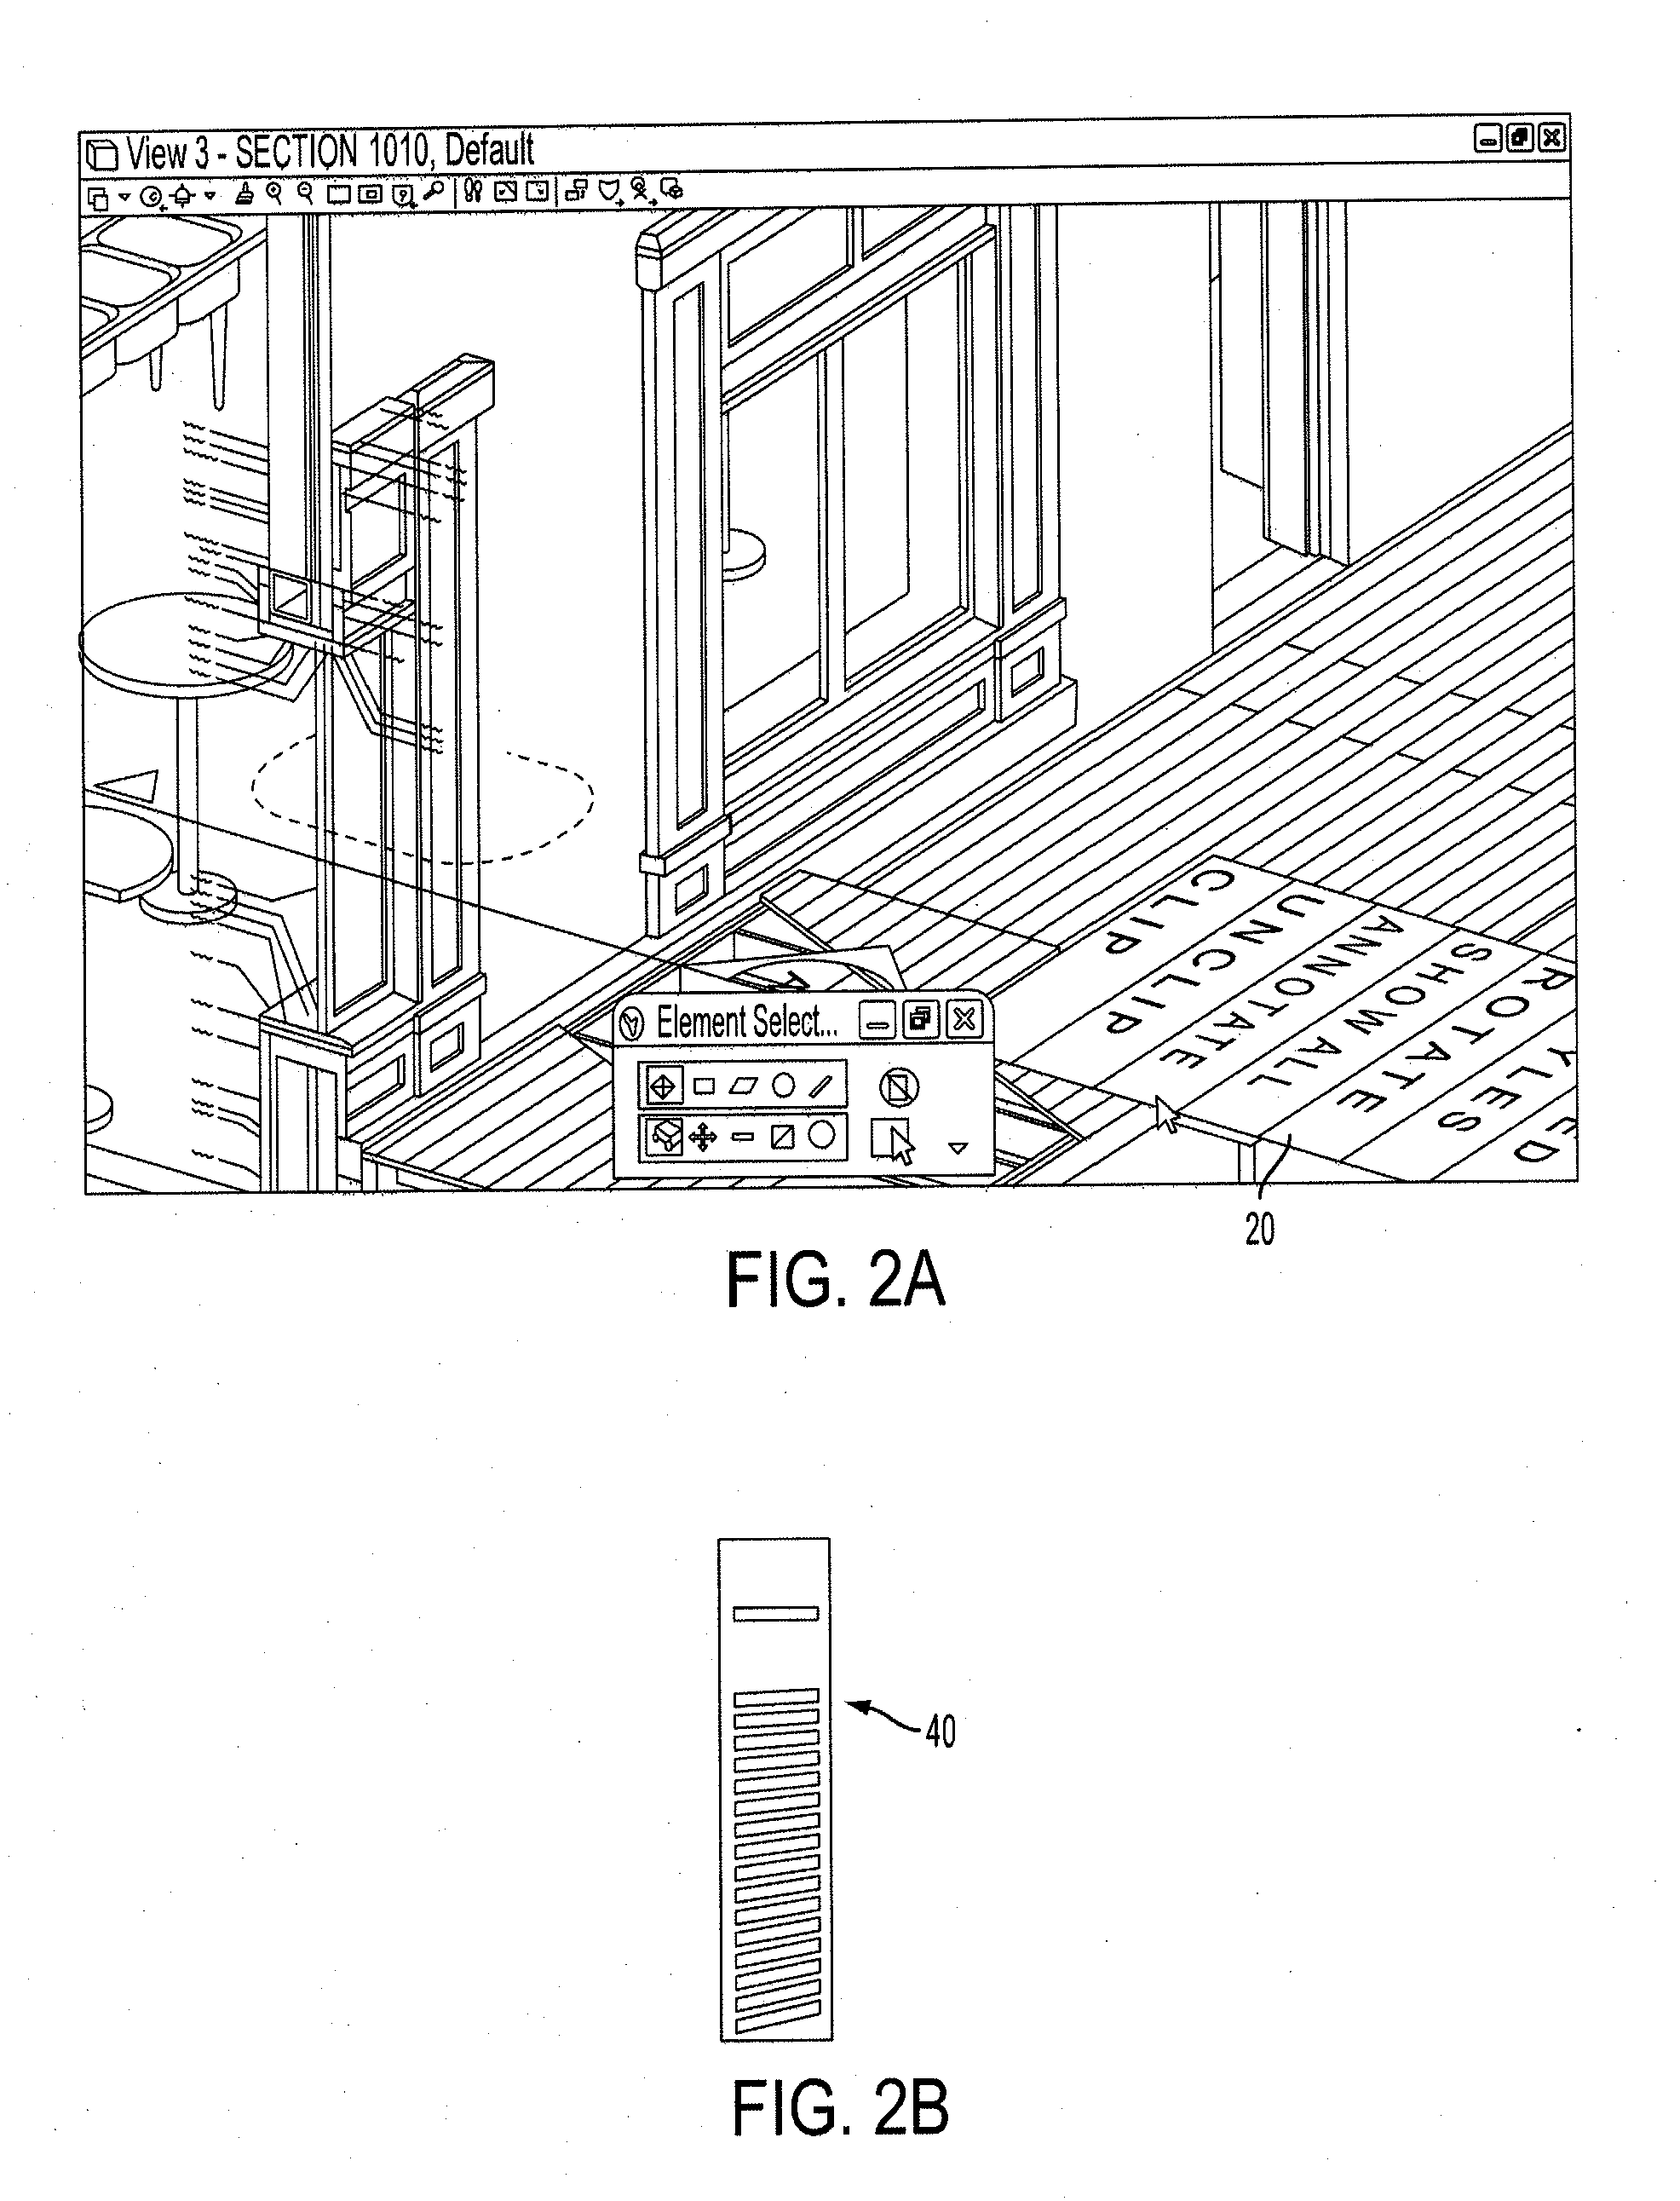 Multi-dimensional artifact assemblage for intrastructural and other assets with interface node mediators